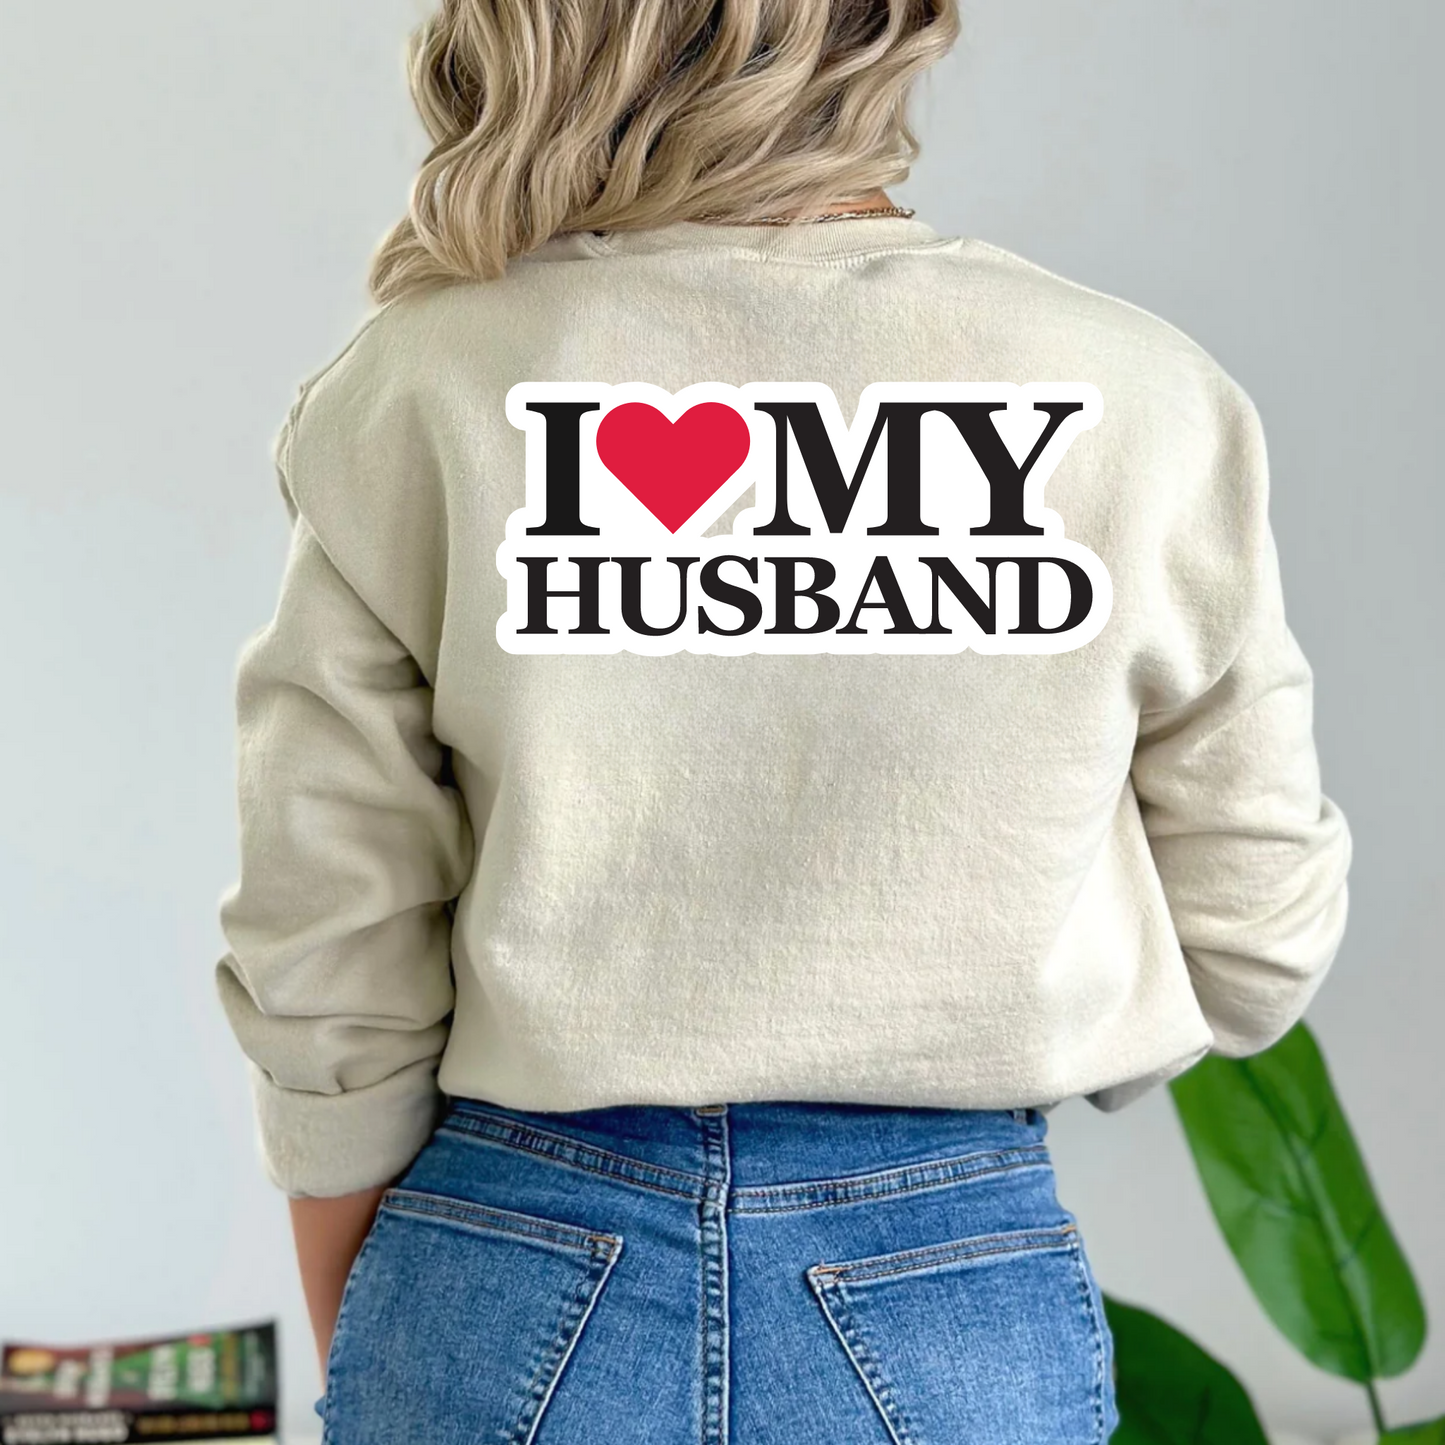 (Shirt not included) I Love my WIFE / HUSBAND-  Matte Clear Film Transfer